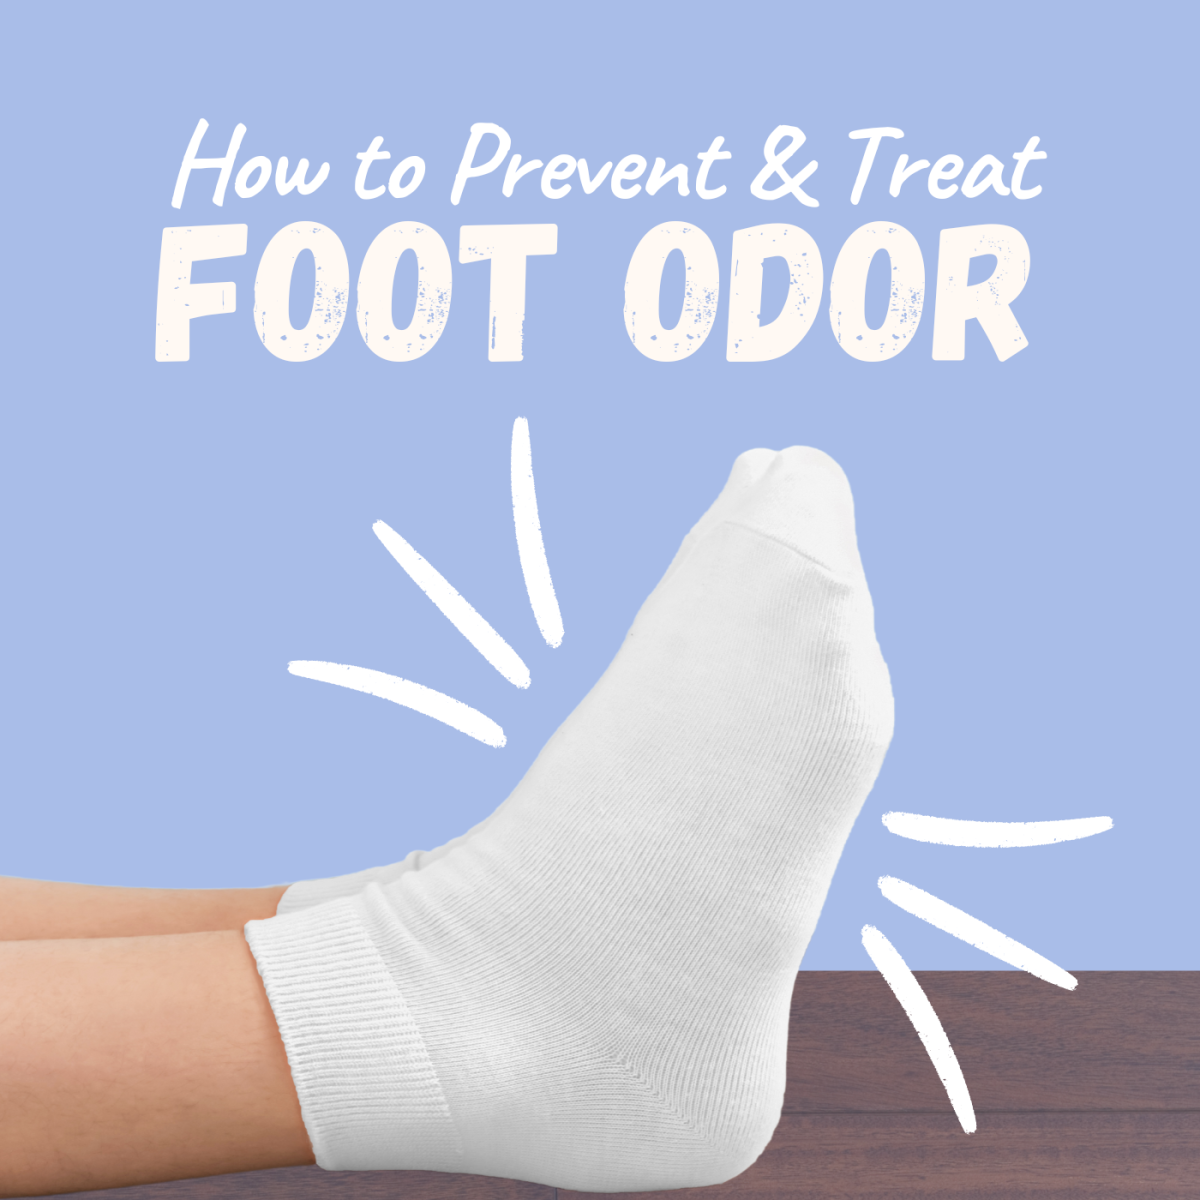 6 Natural Ways to Prevent and Treat Foot Odor